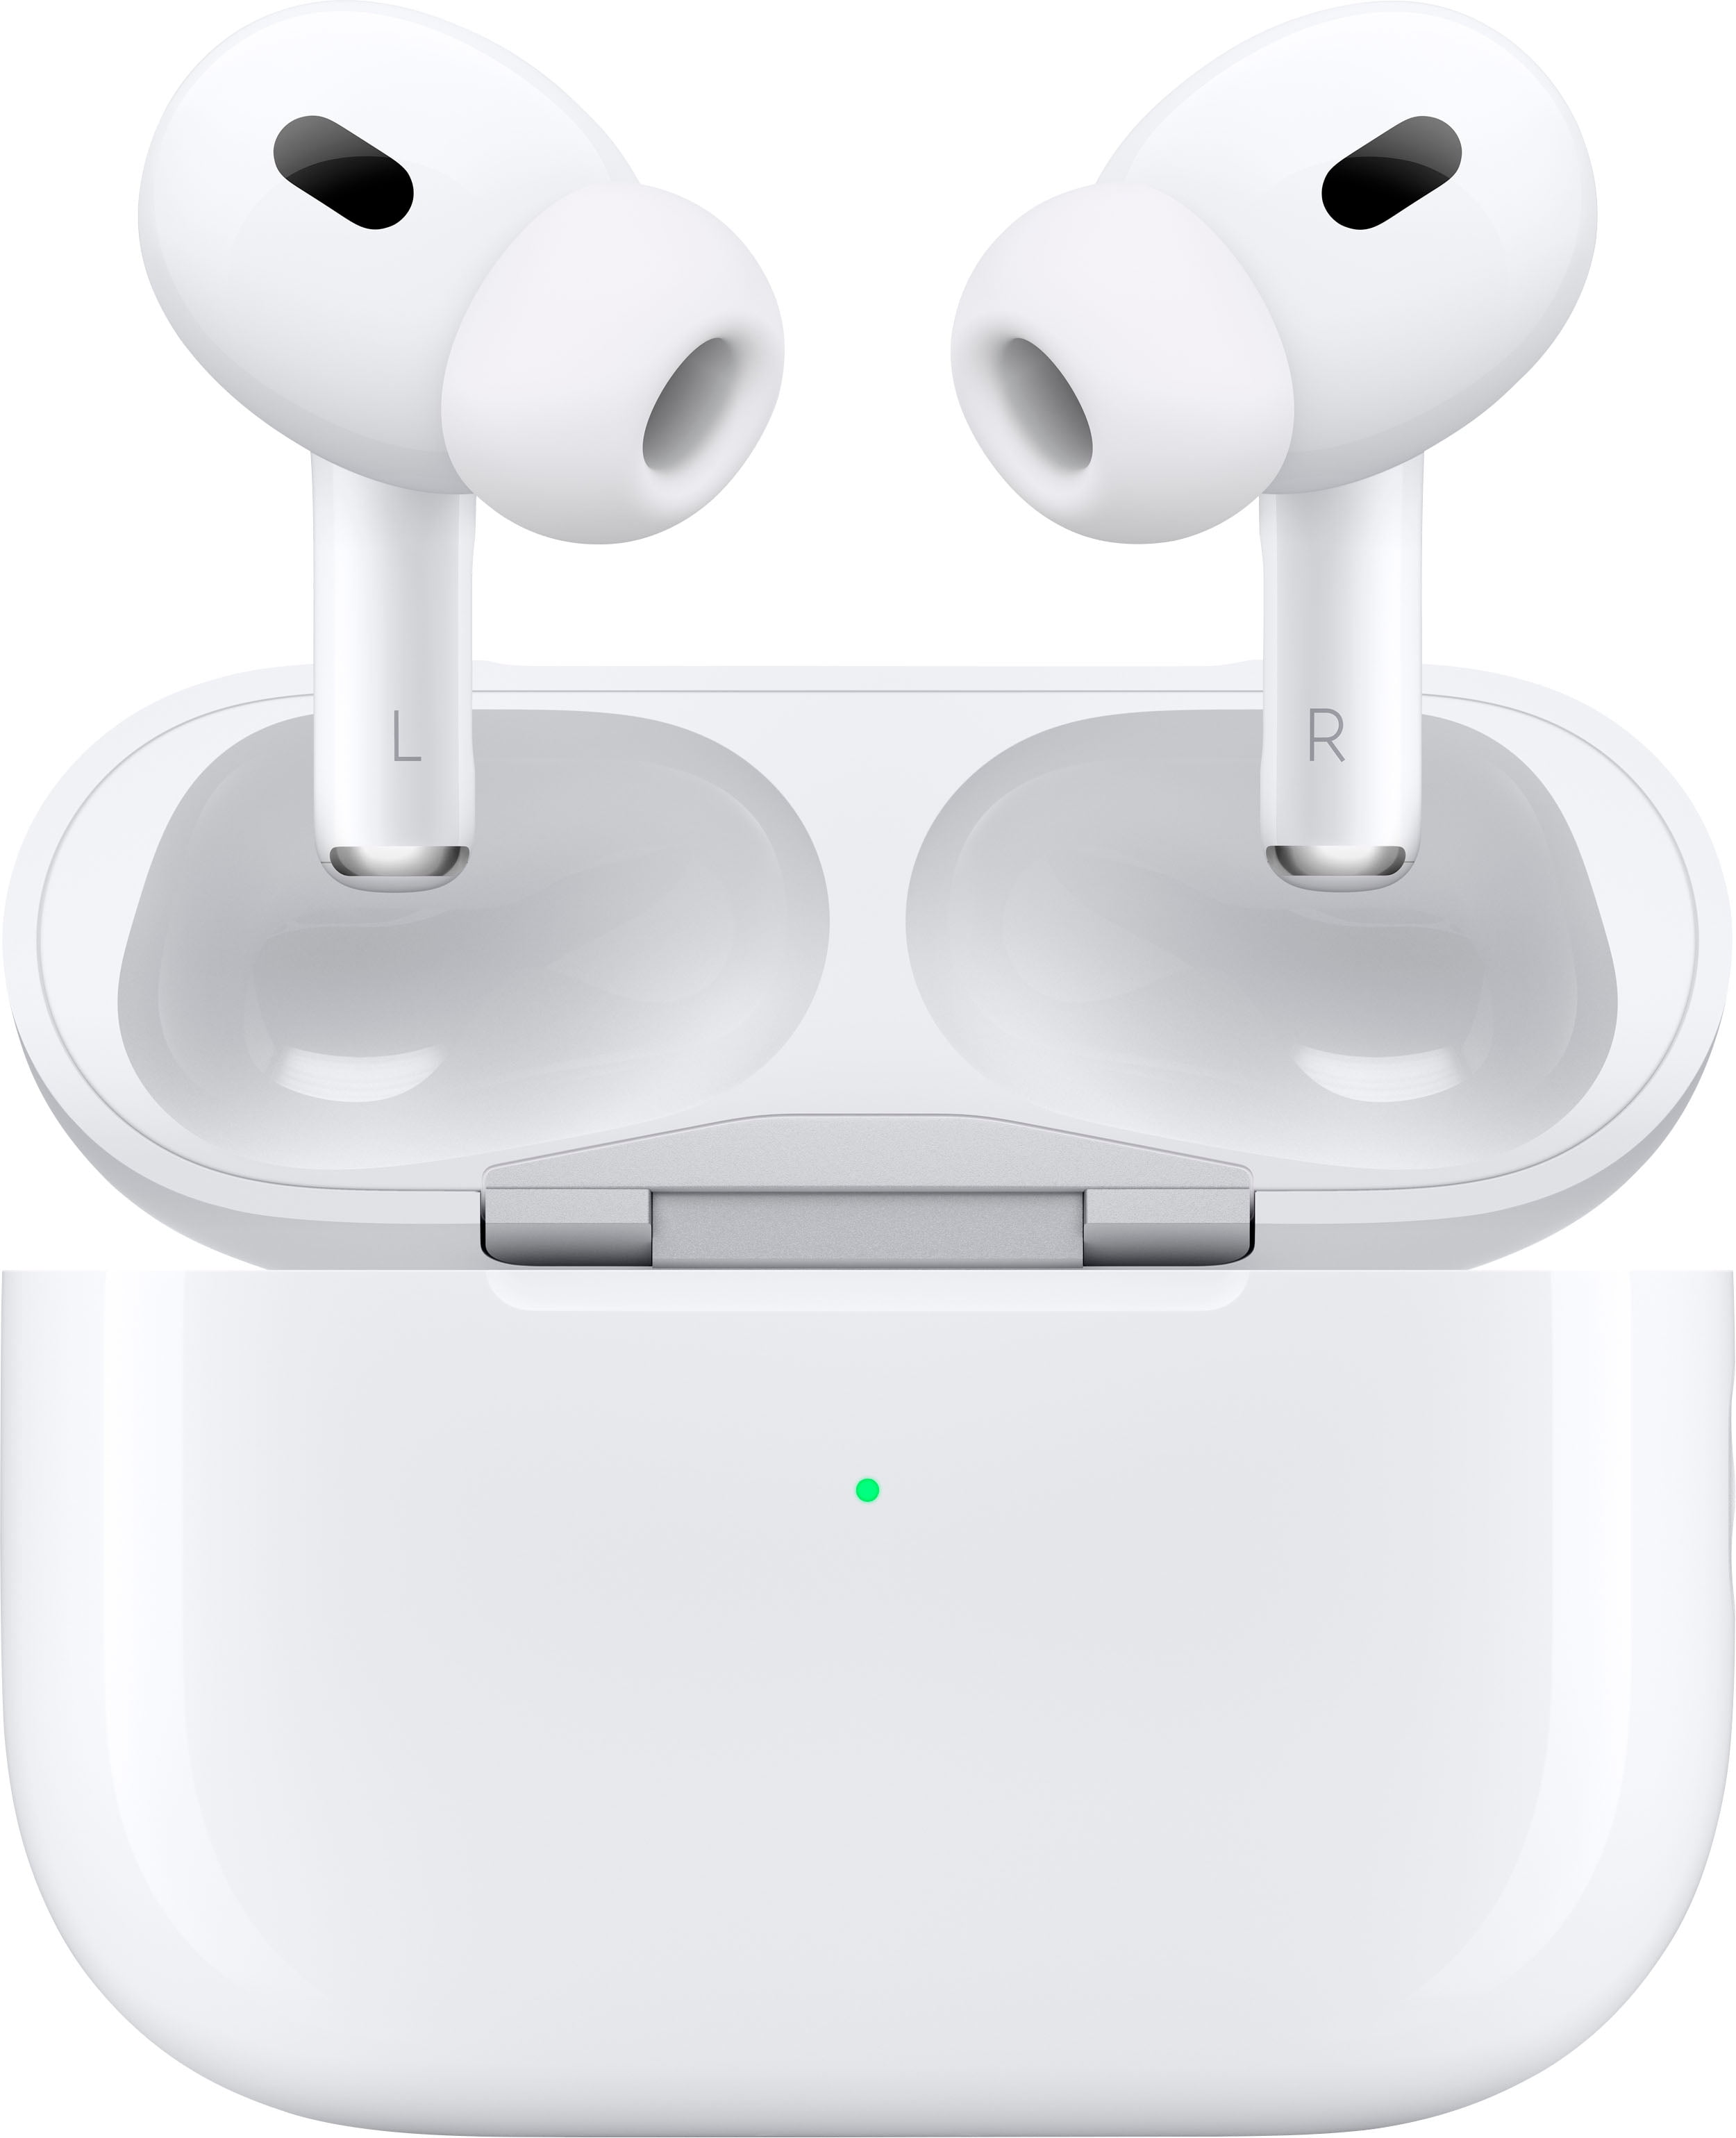 Restored Apple AirPods 2 with Charging Case - White (Refurbished) 